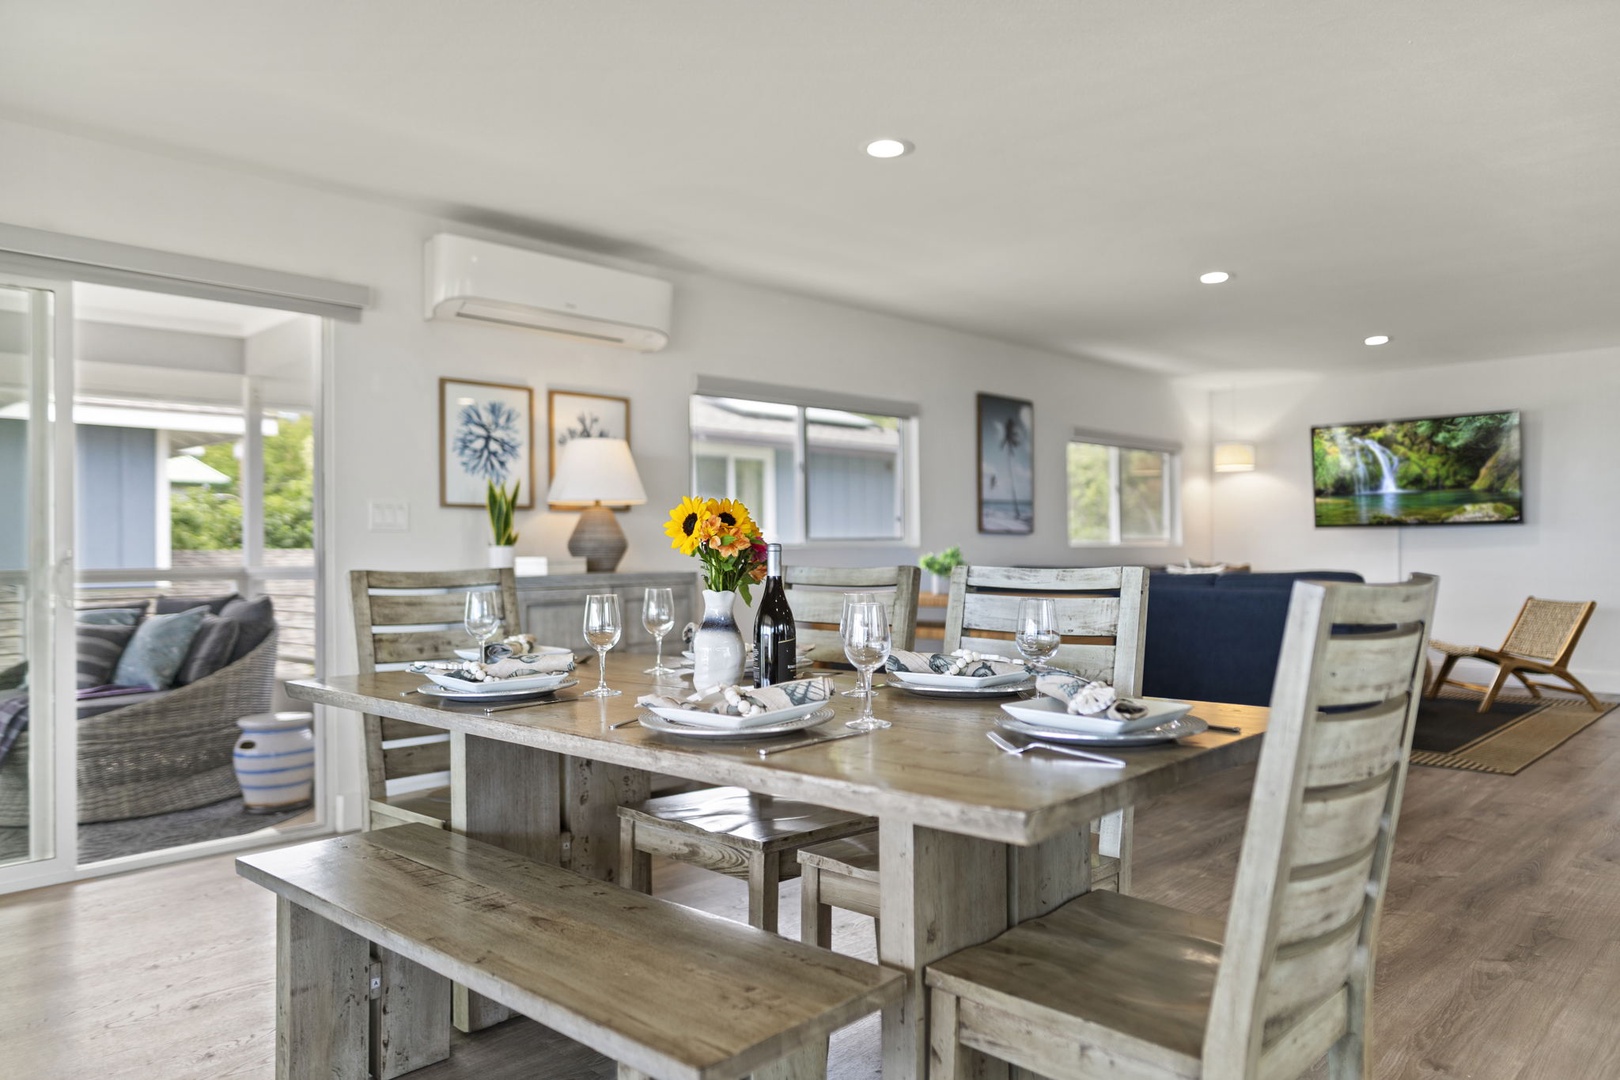 Haleiwa Vacation Rentals, Hale Nalu - The dining table offers seating for 6